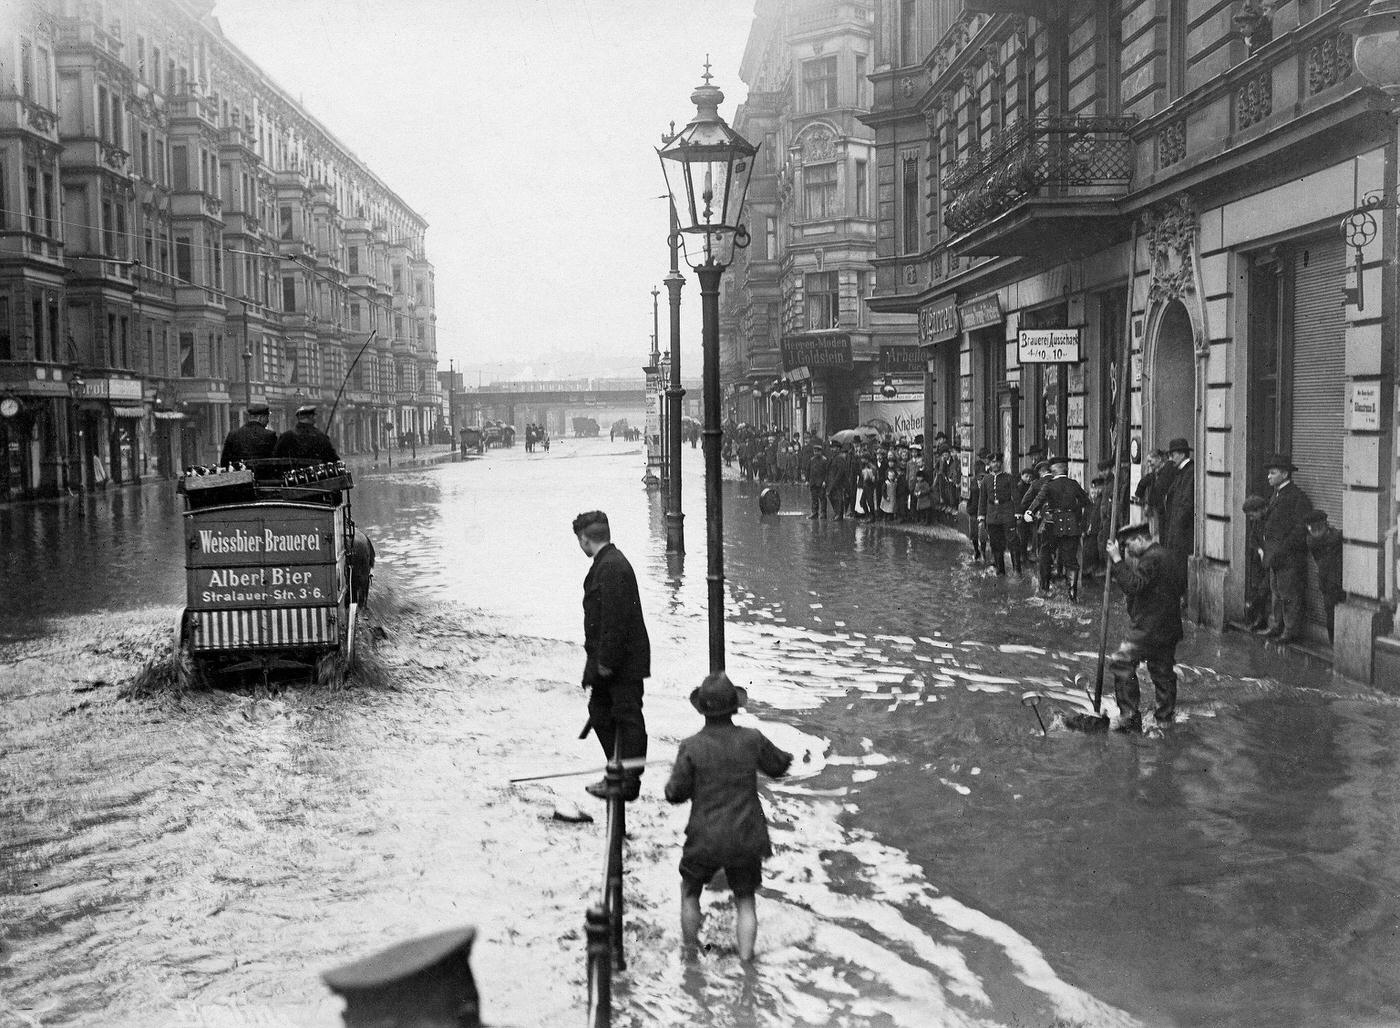 Berlin: People on submerged street after deluge, Germany, 1902.